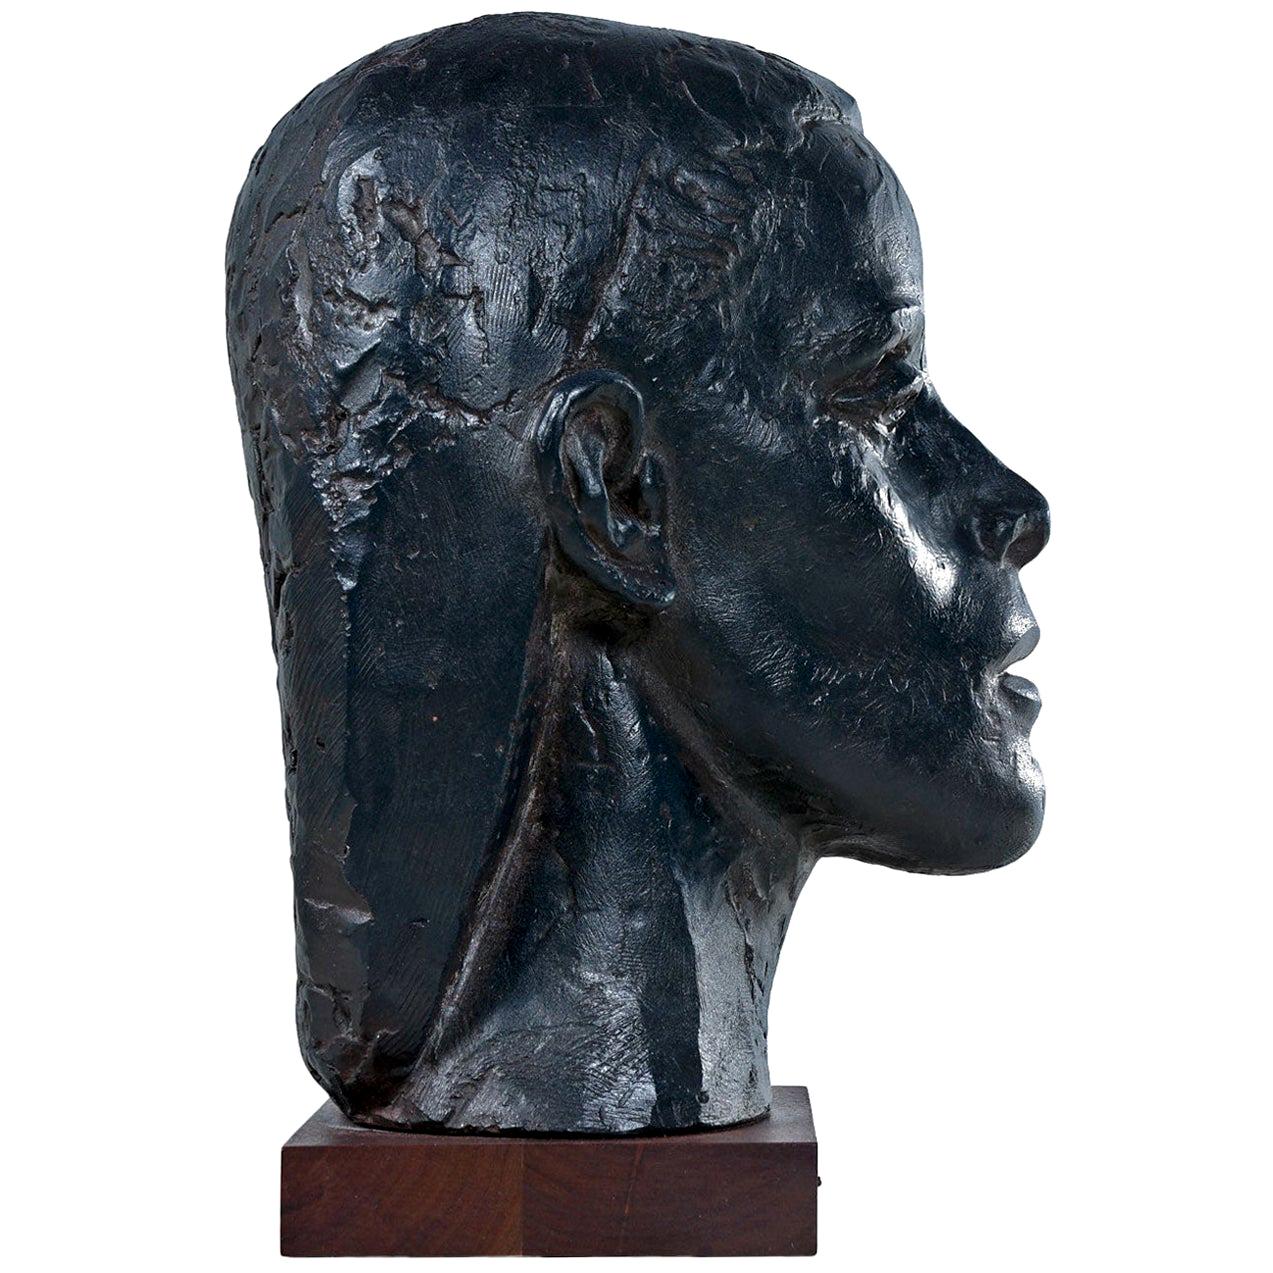 Bust of Martha Graham made by Joseph Konzal. Created in the 1950s and comprised of a painted bronze patina on plaster mounted to a wooden base. Konzal was a recognized sculptor who designed busts of other notable figures between 1930 and 1960